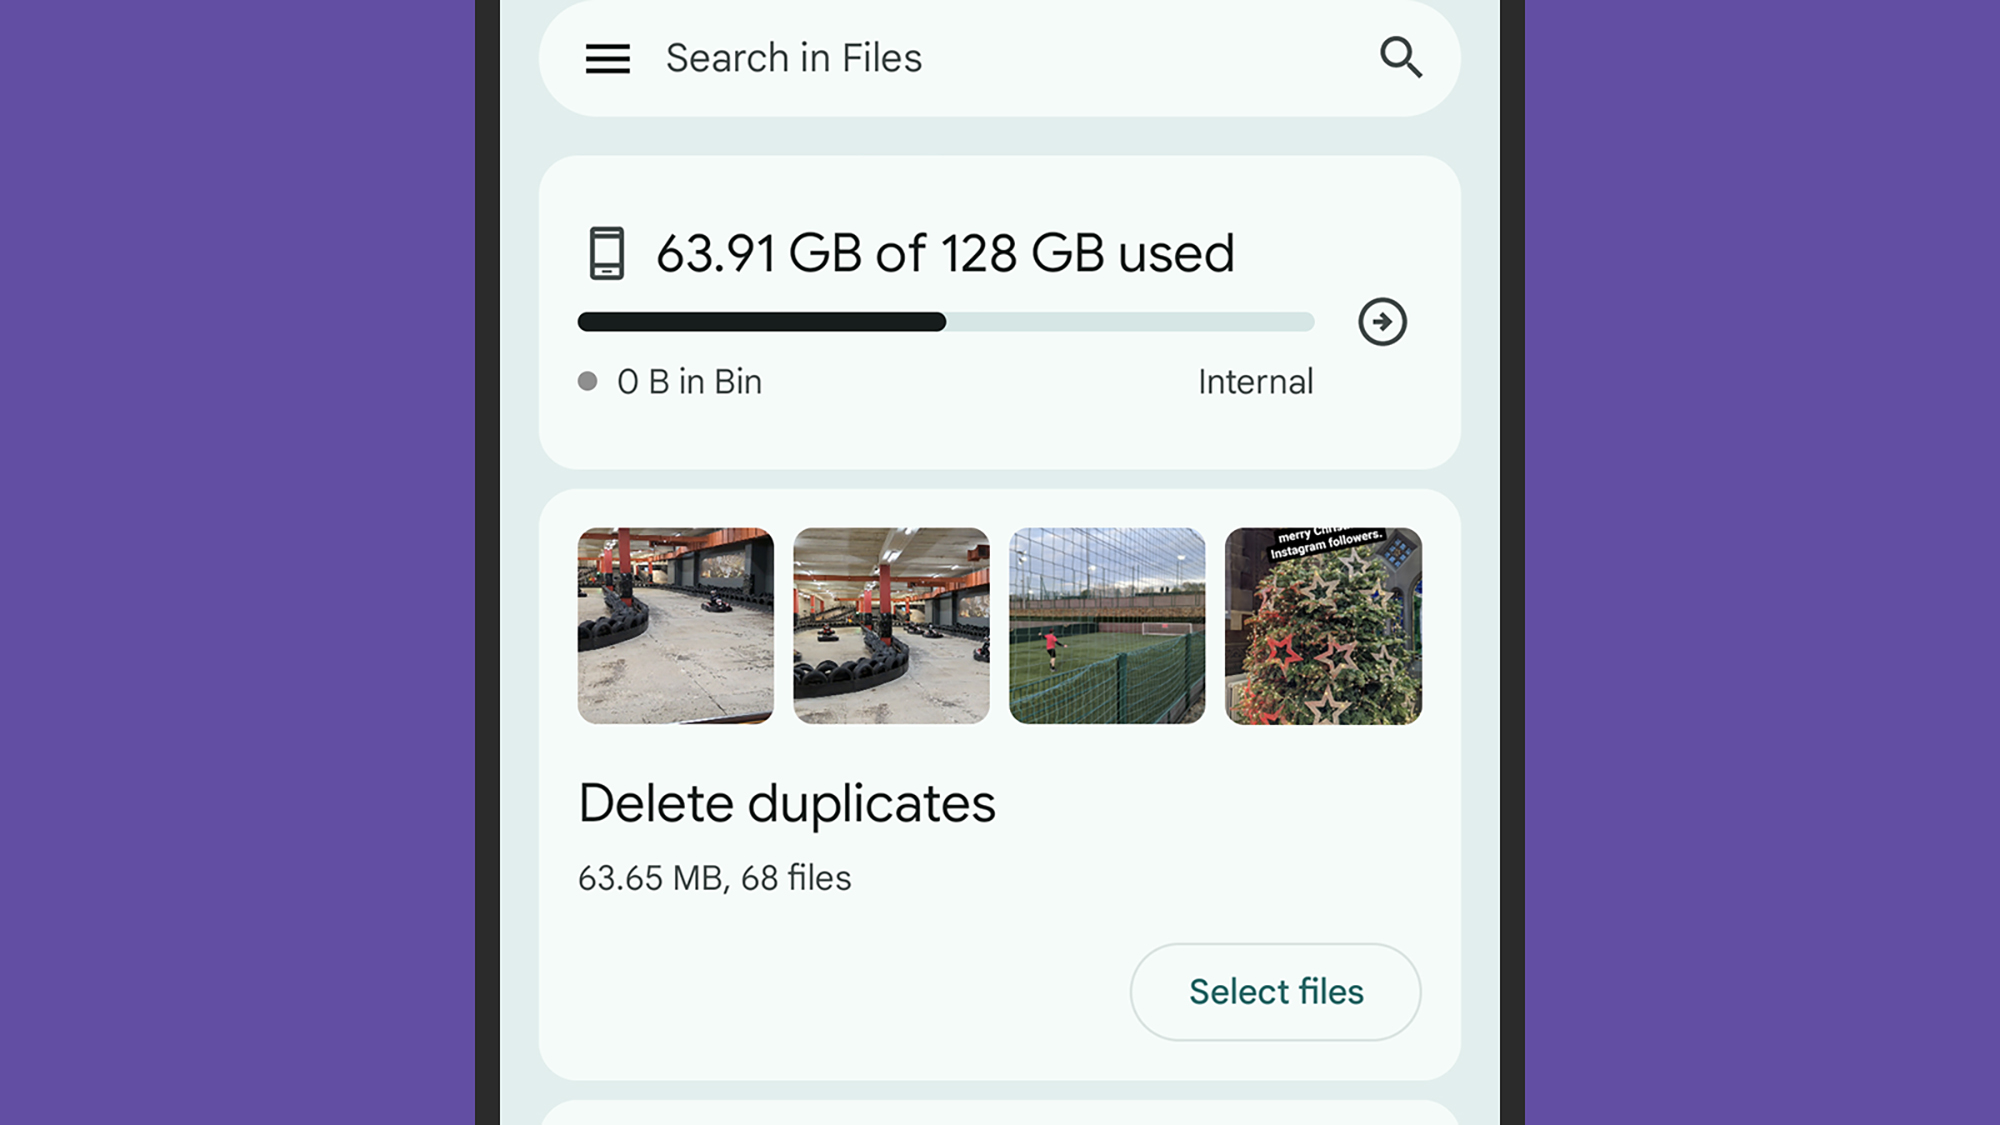 Use Files by Google to find duplicates on Android.